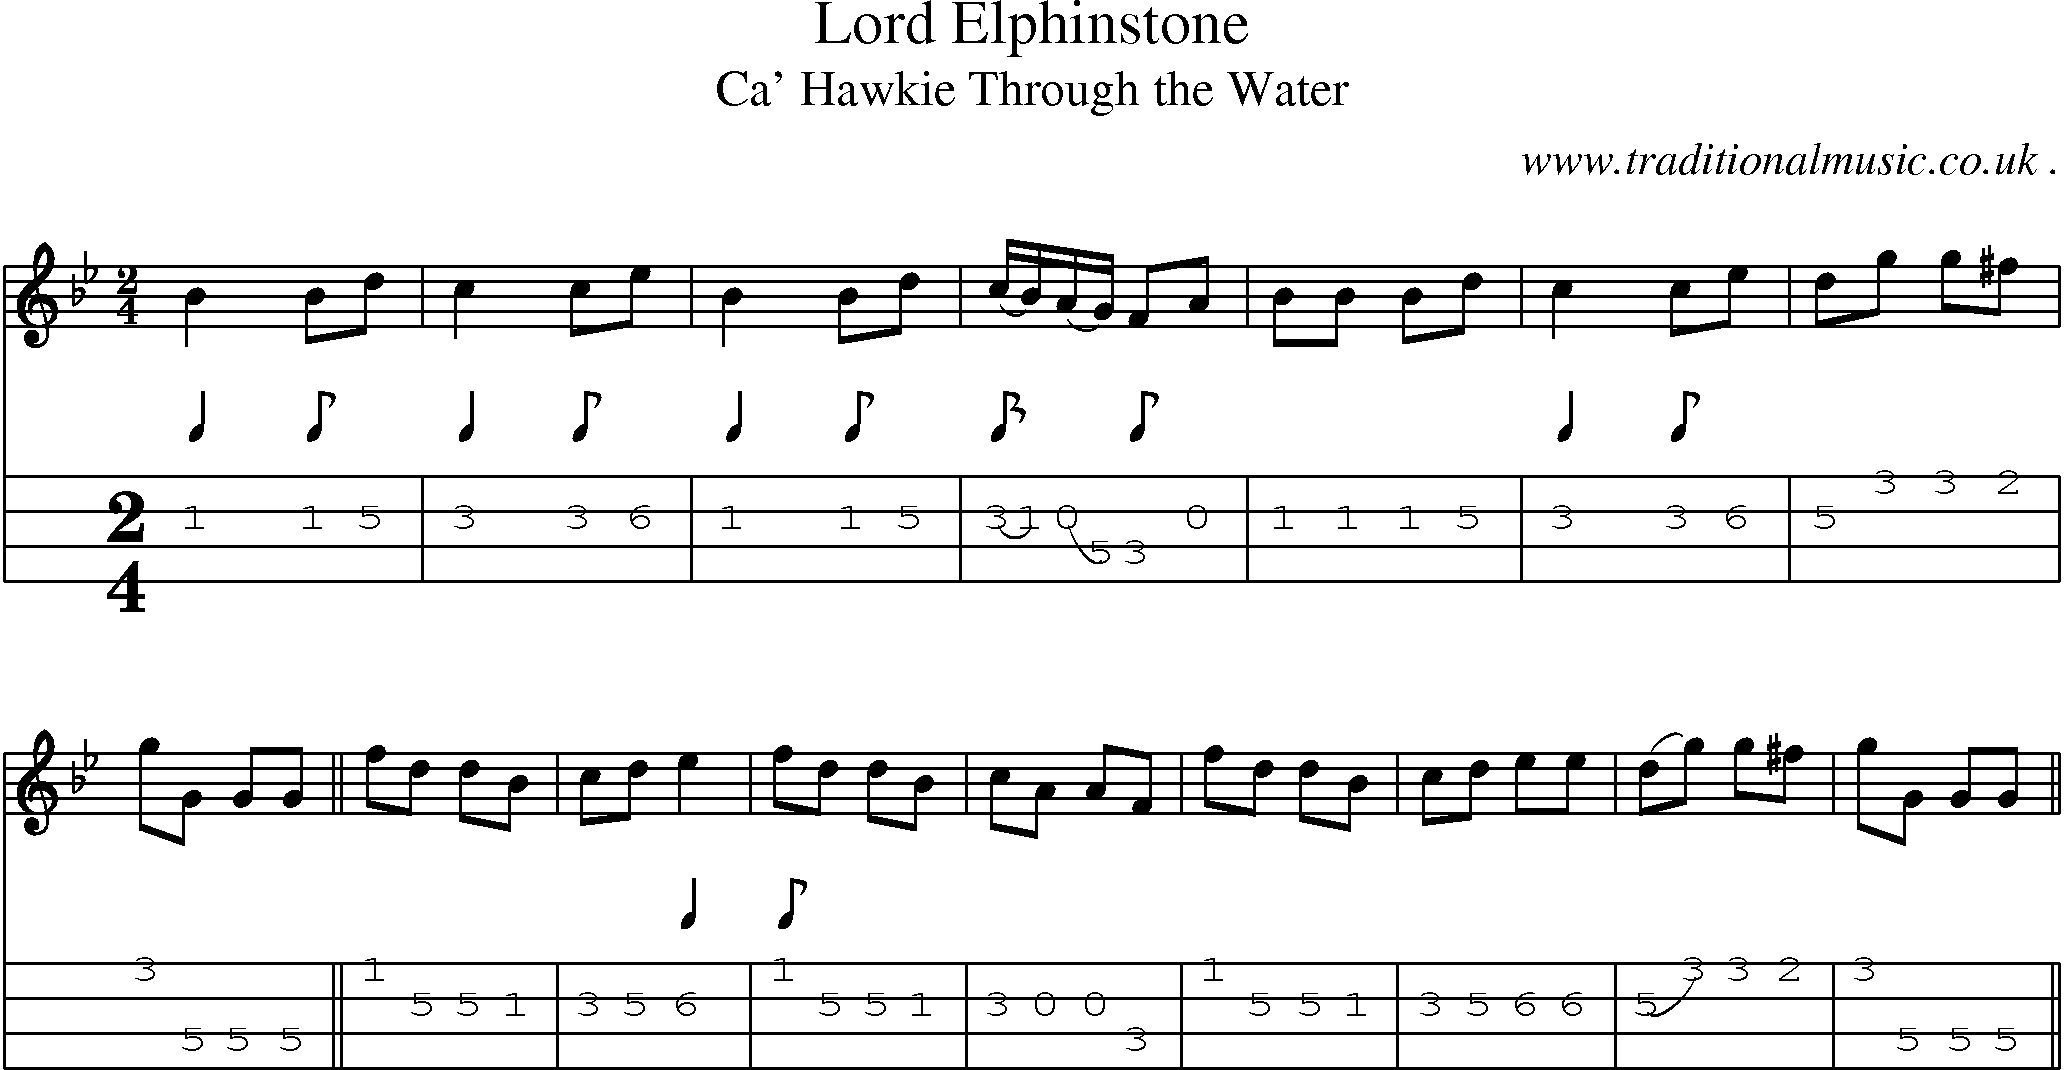 Sheet-music  score, Chords and Mandolin Tabs for Lord Elphinstone